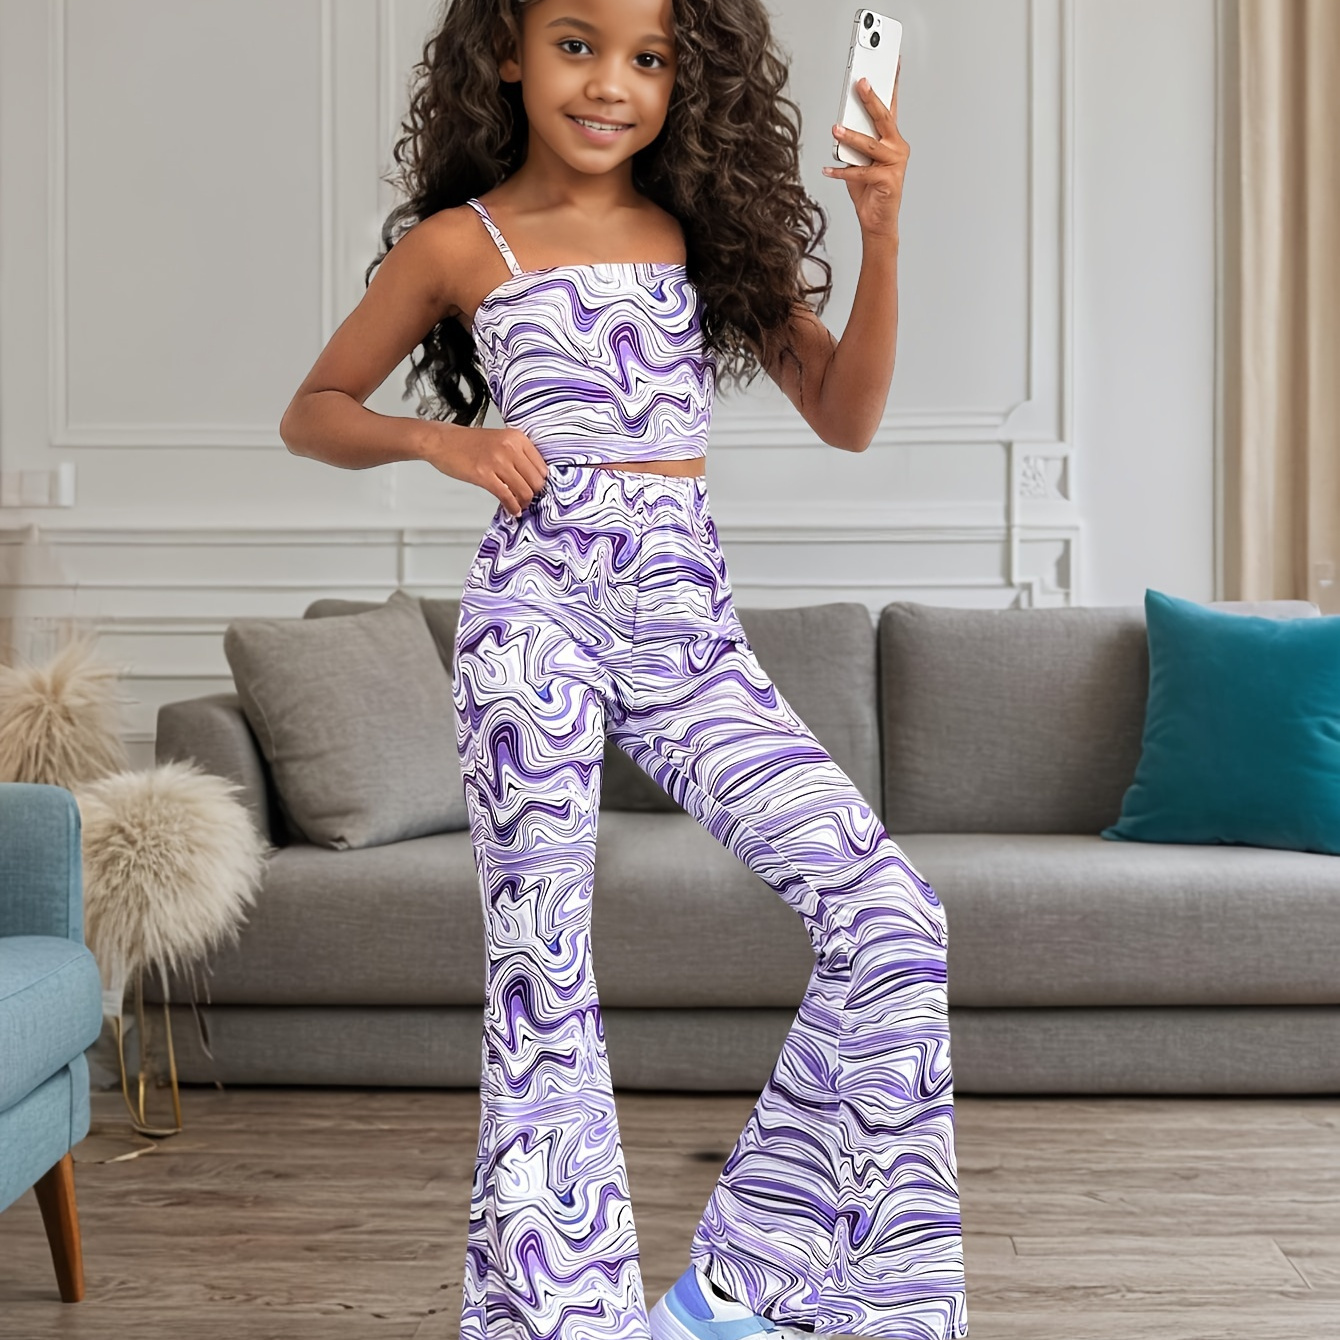 

Clouds Print Girls Co-ords Set, Cami Top + Flared Trousers - Spring/summer Clothes, Casual Outing, Party, Gift